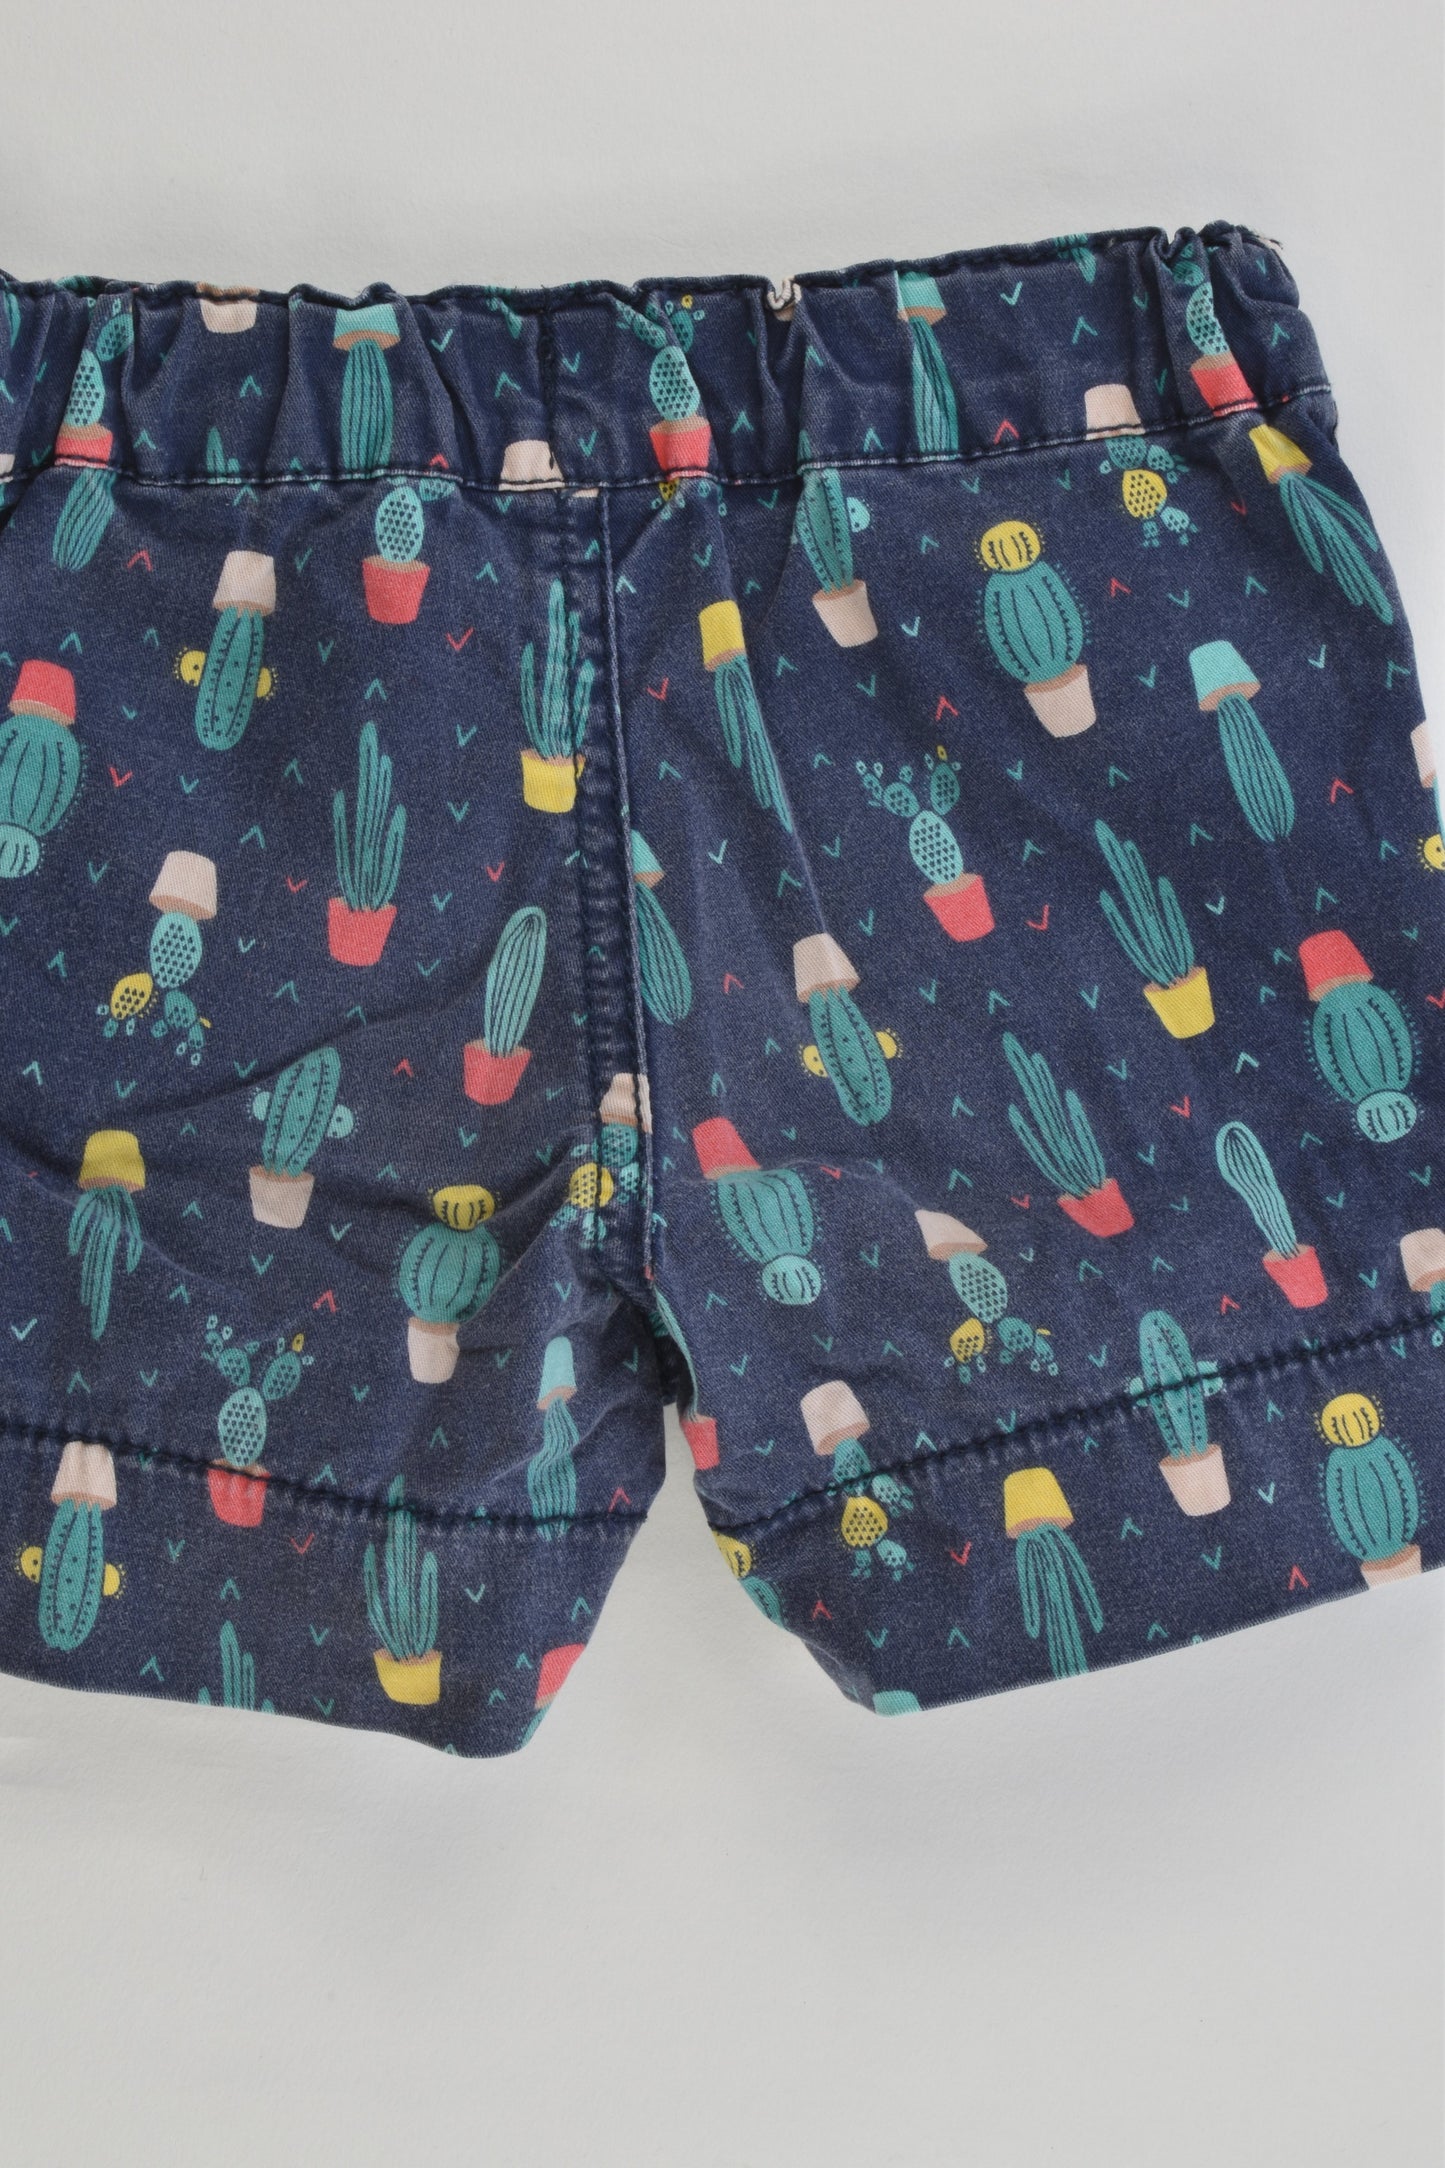 Target Size 00 (3-6 months) Stretchy Cactus Shorts